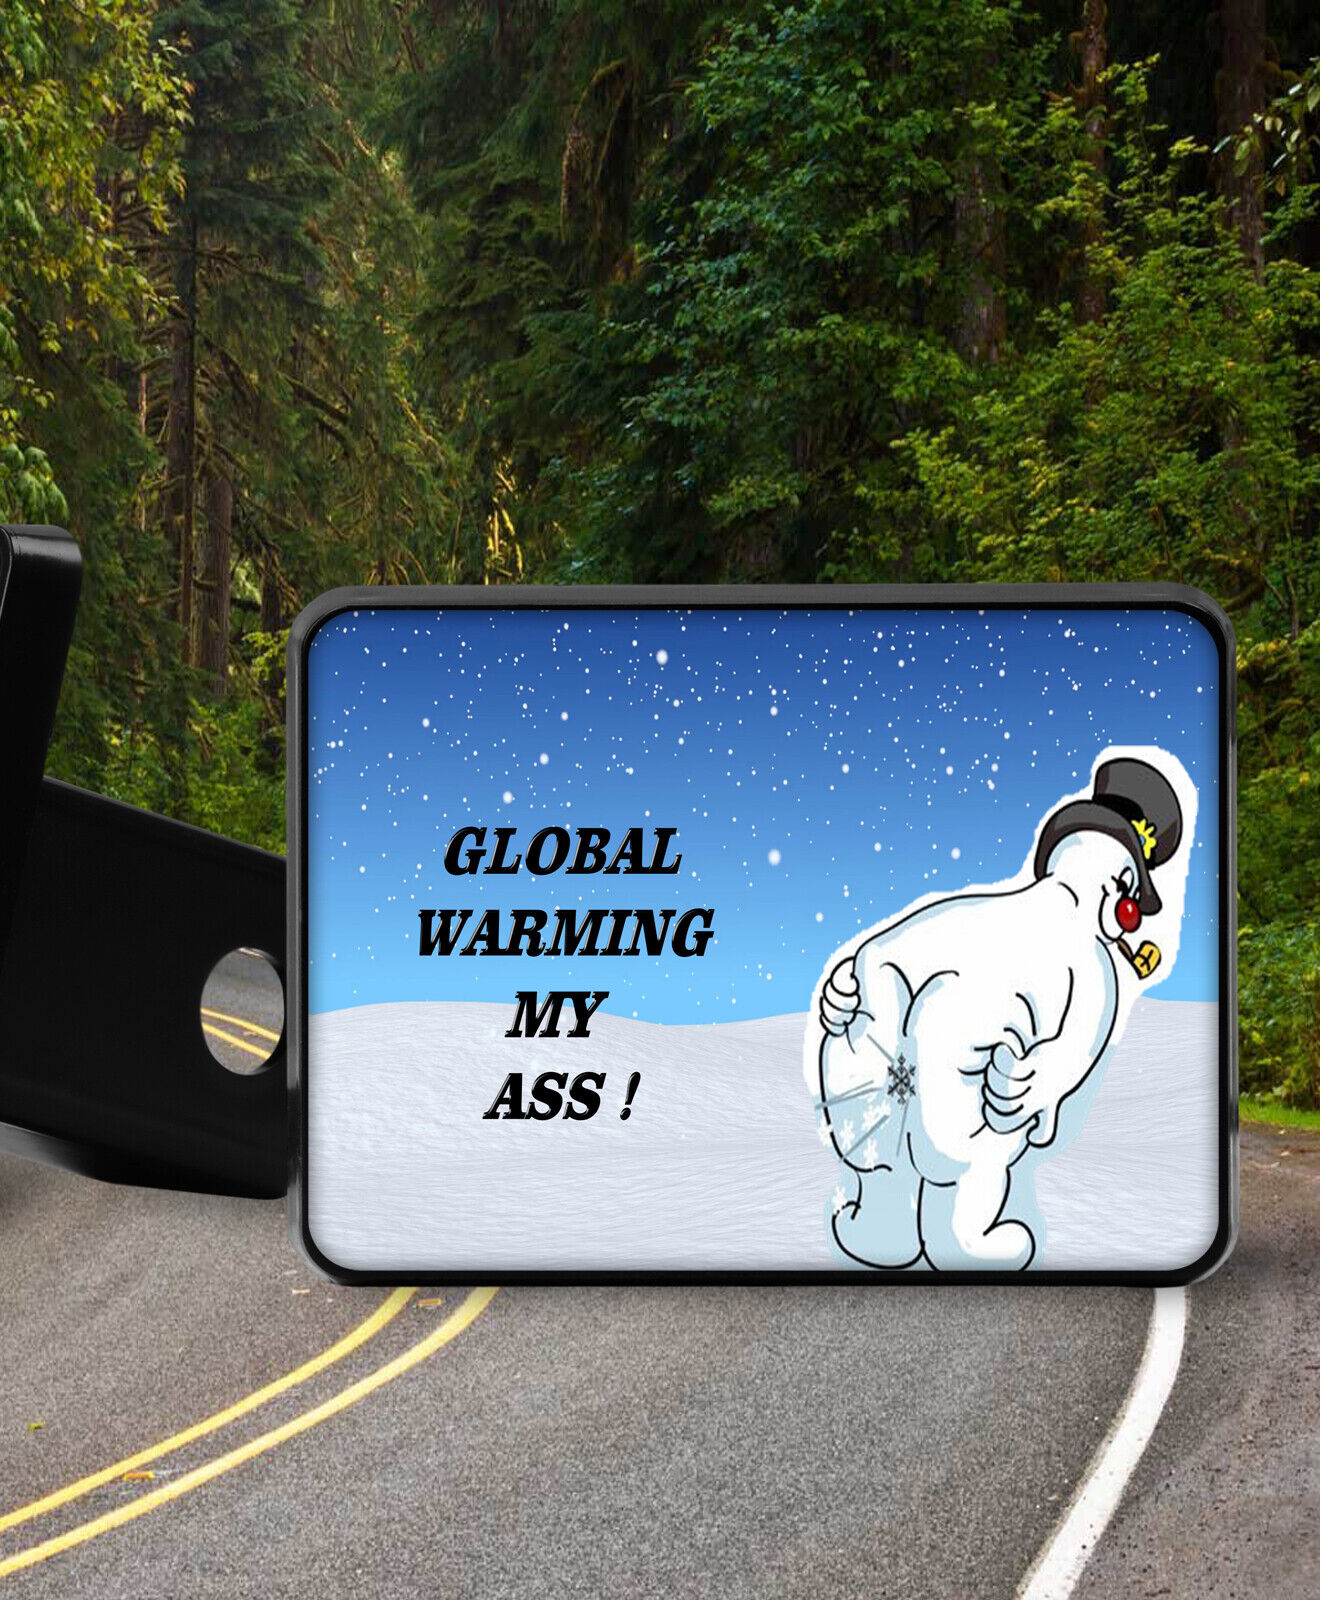 GLOBAL WARMING MY ASS new Trailer Hitch Cover Plug